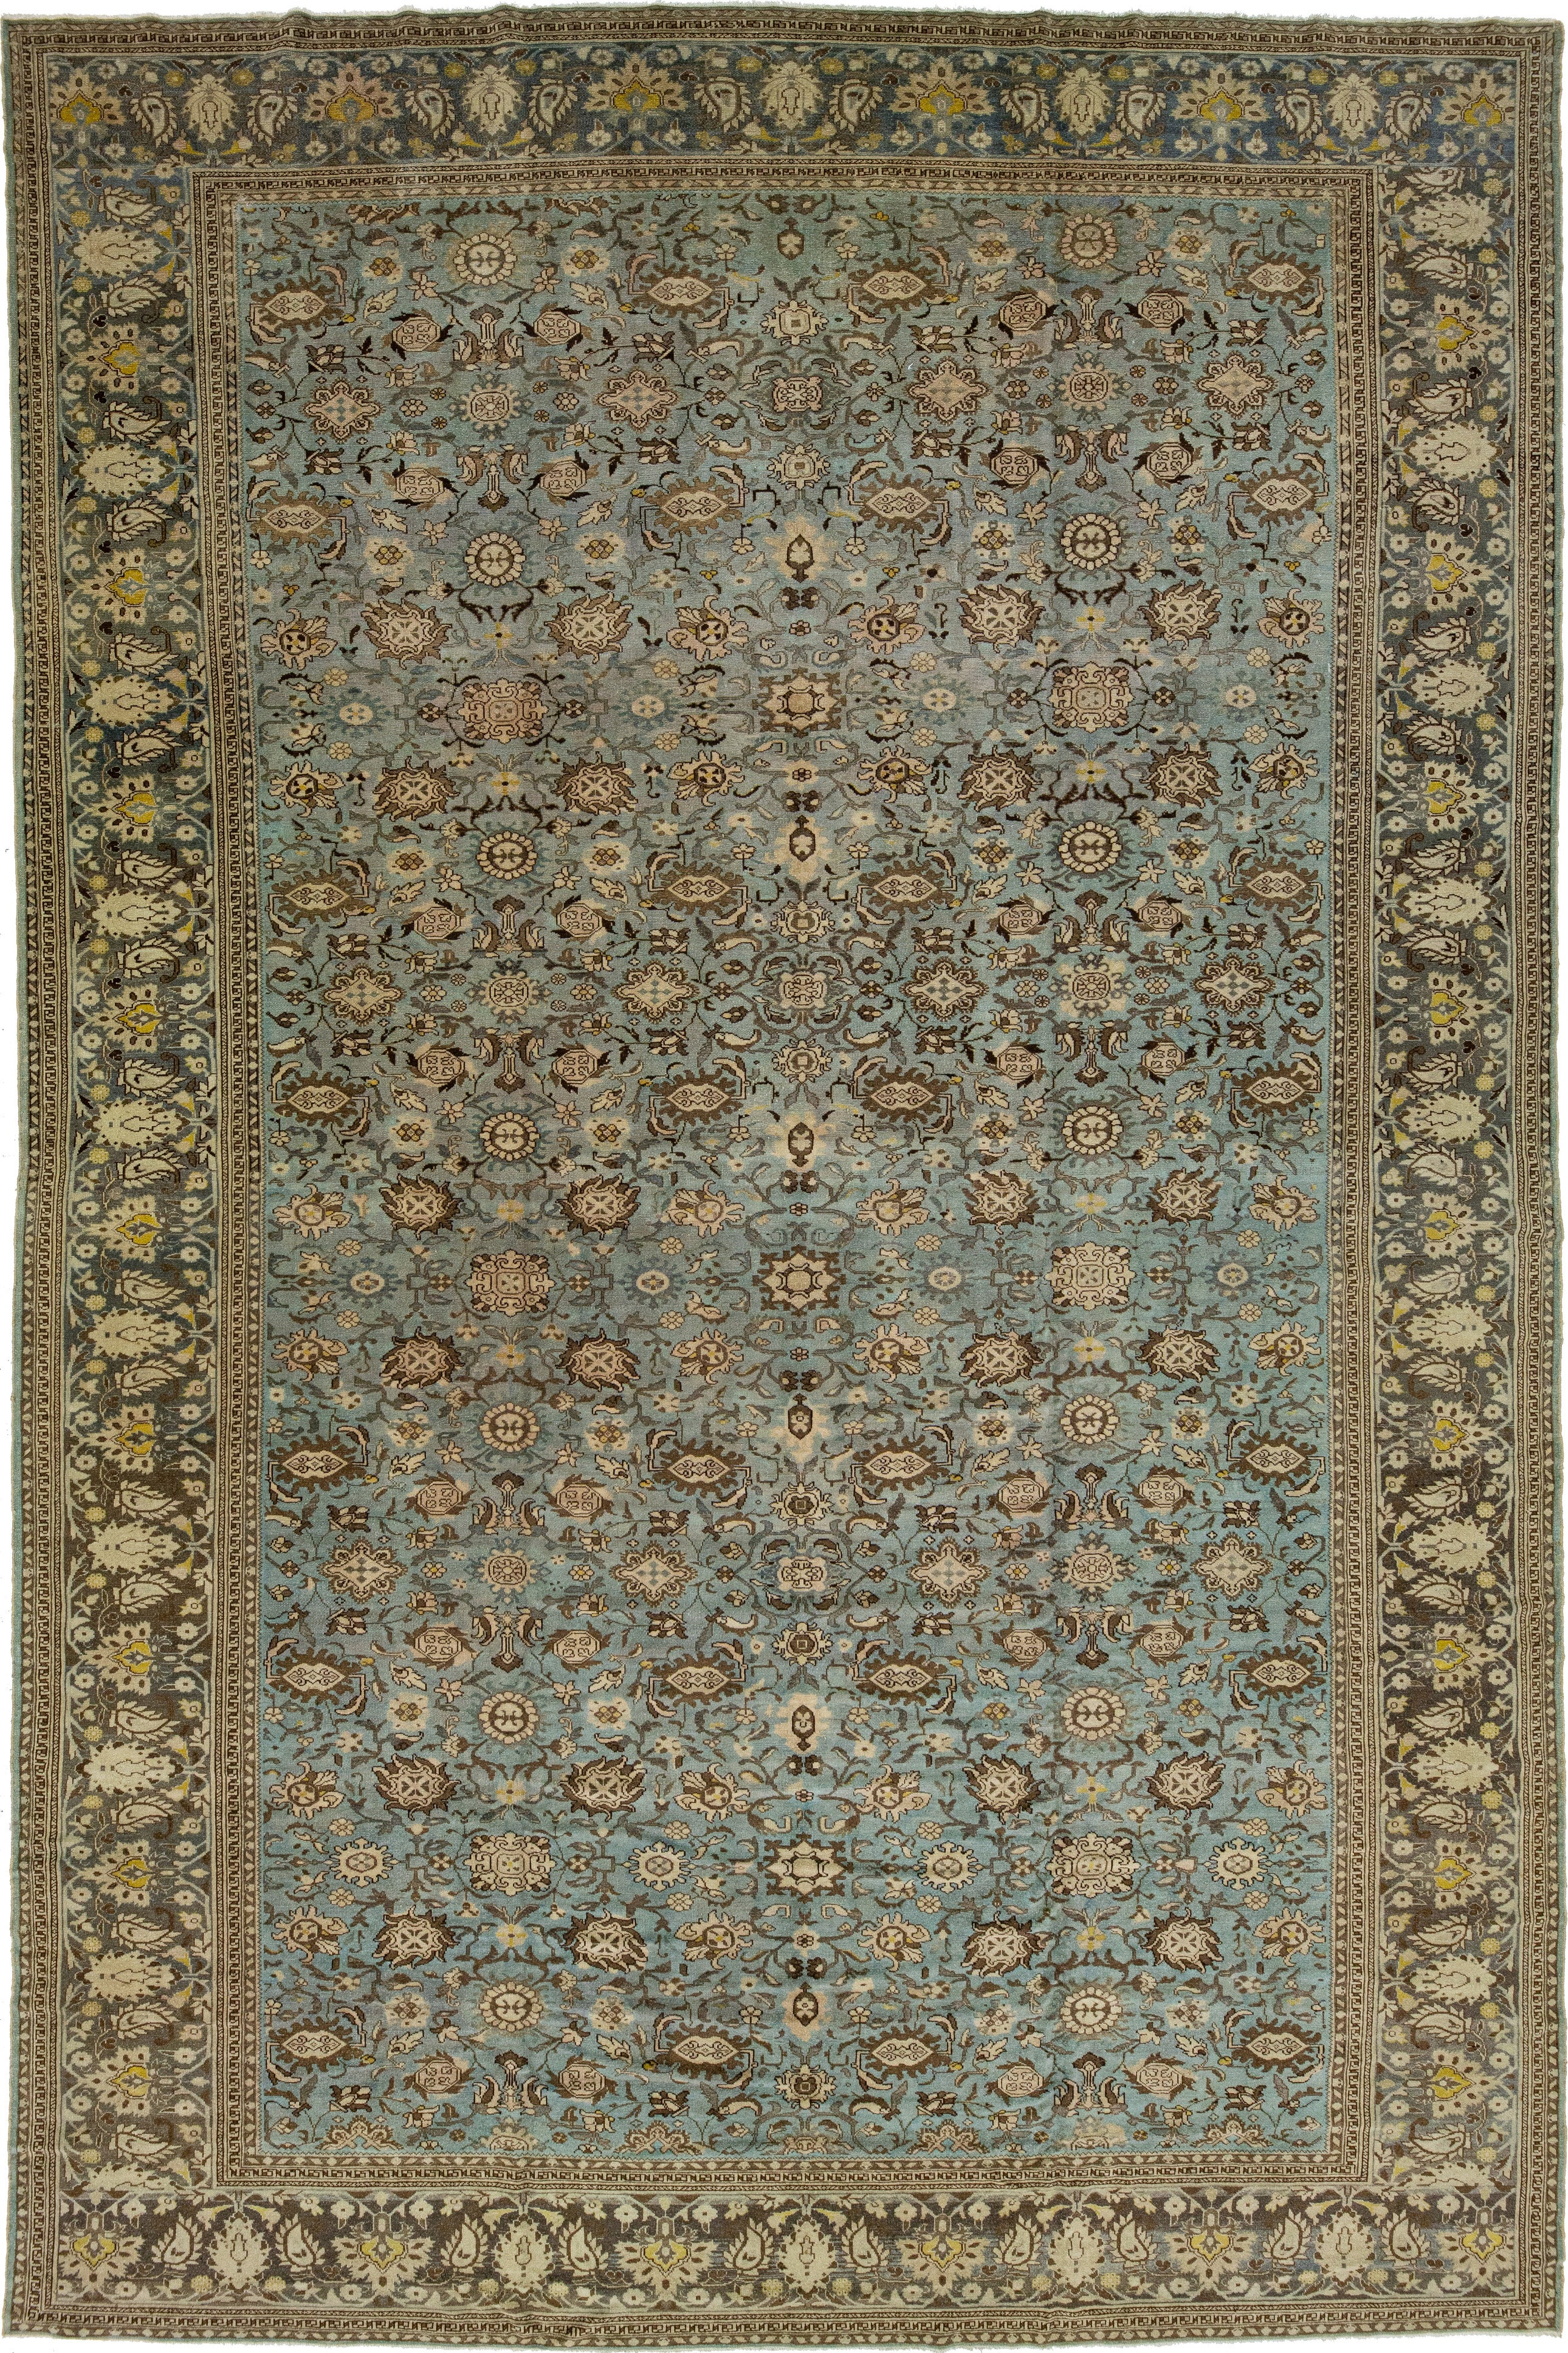 Blue Antique Malayer Handmade Persian Wool Rug with Allover Floral Motif